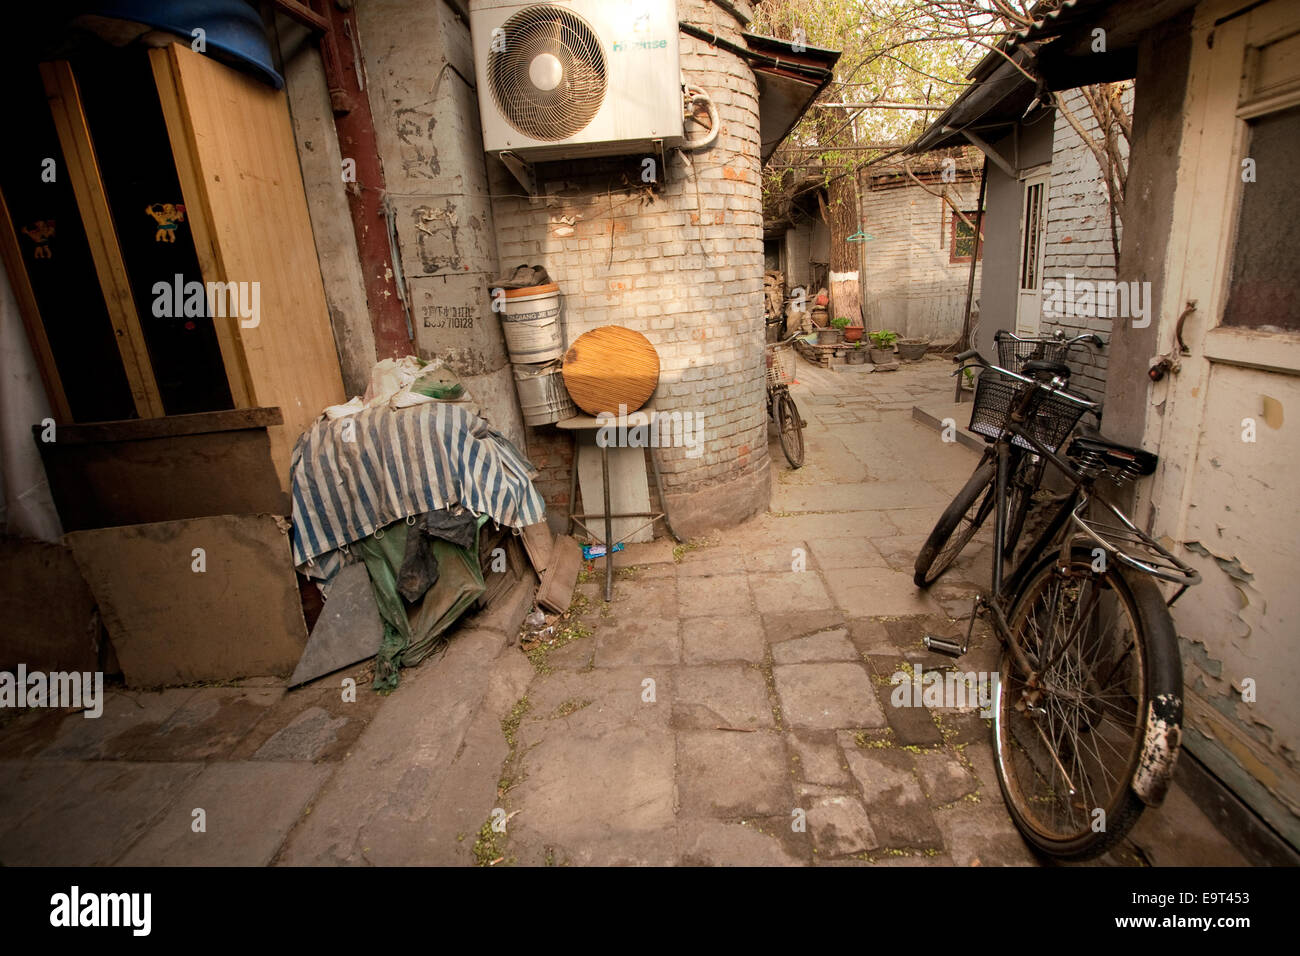 Ruelle hutong, Beijing, Chine Banque D'Images